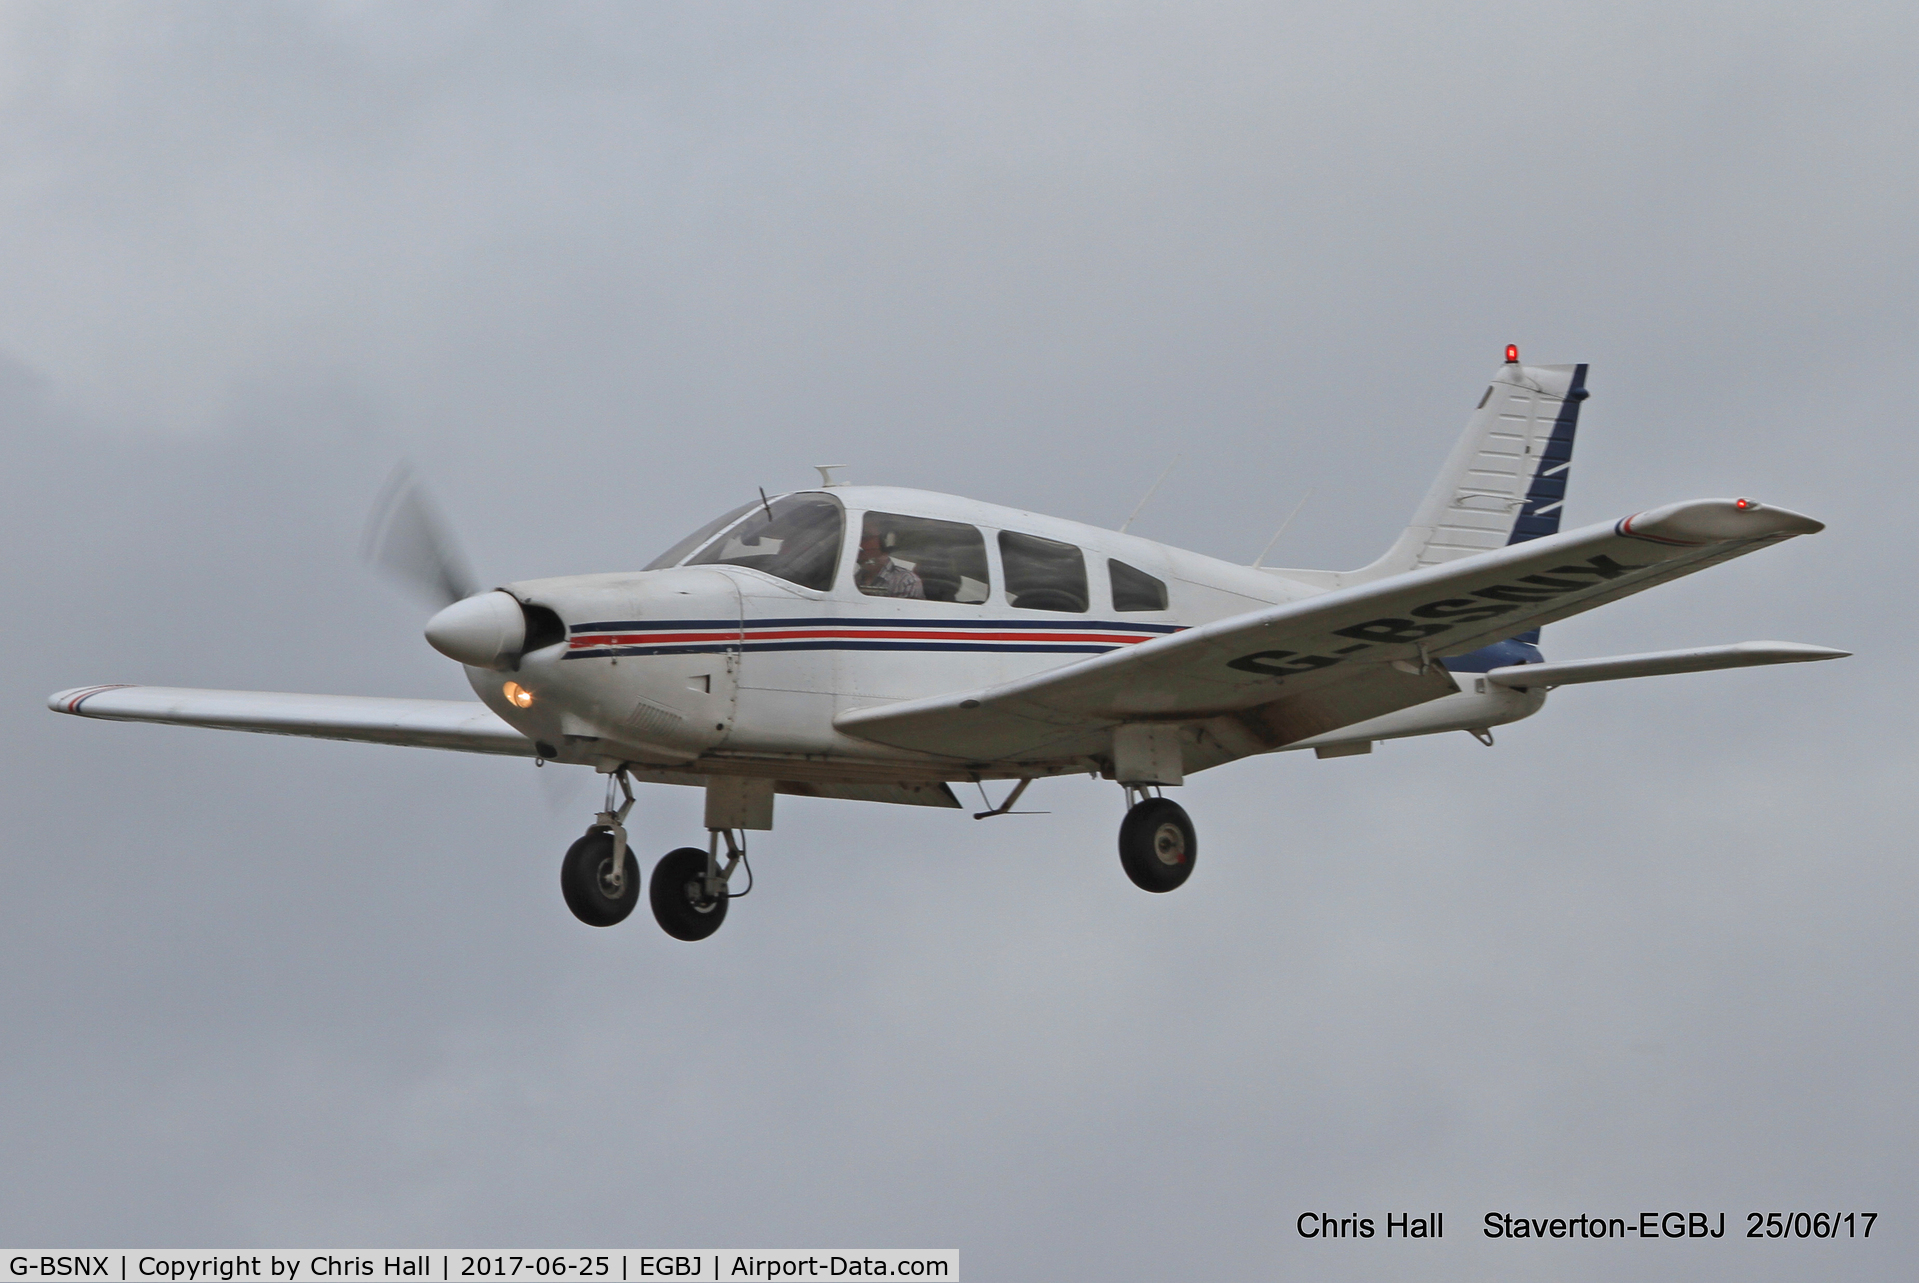 G-BSNX, 1979 Piper PA-28-181 Cherokee Archer II C/N 28-7990311, Project Propeller at Staverton